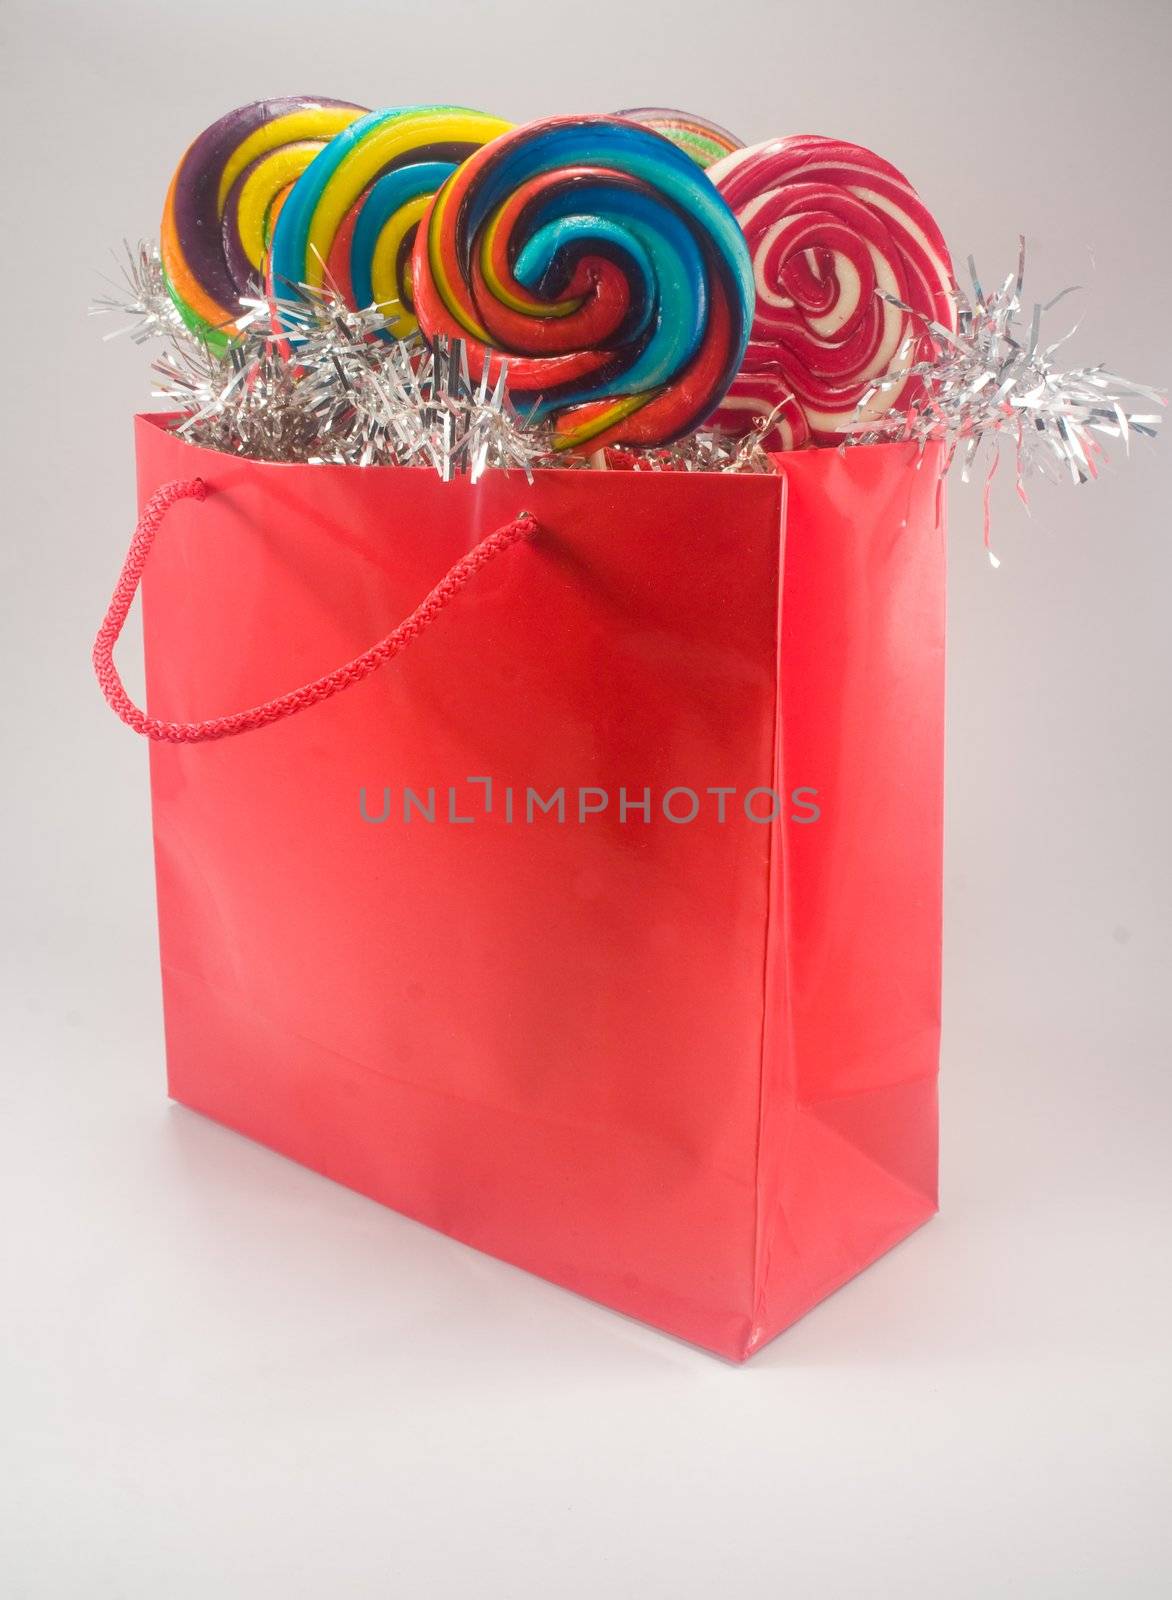 Shiny red gift bag filled with candy against plain background